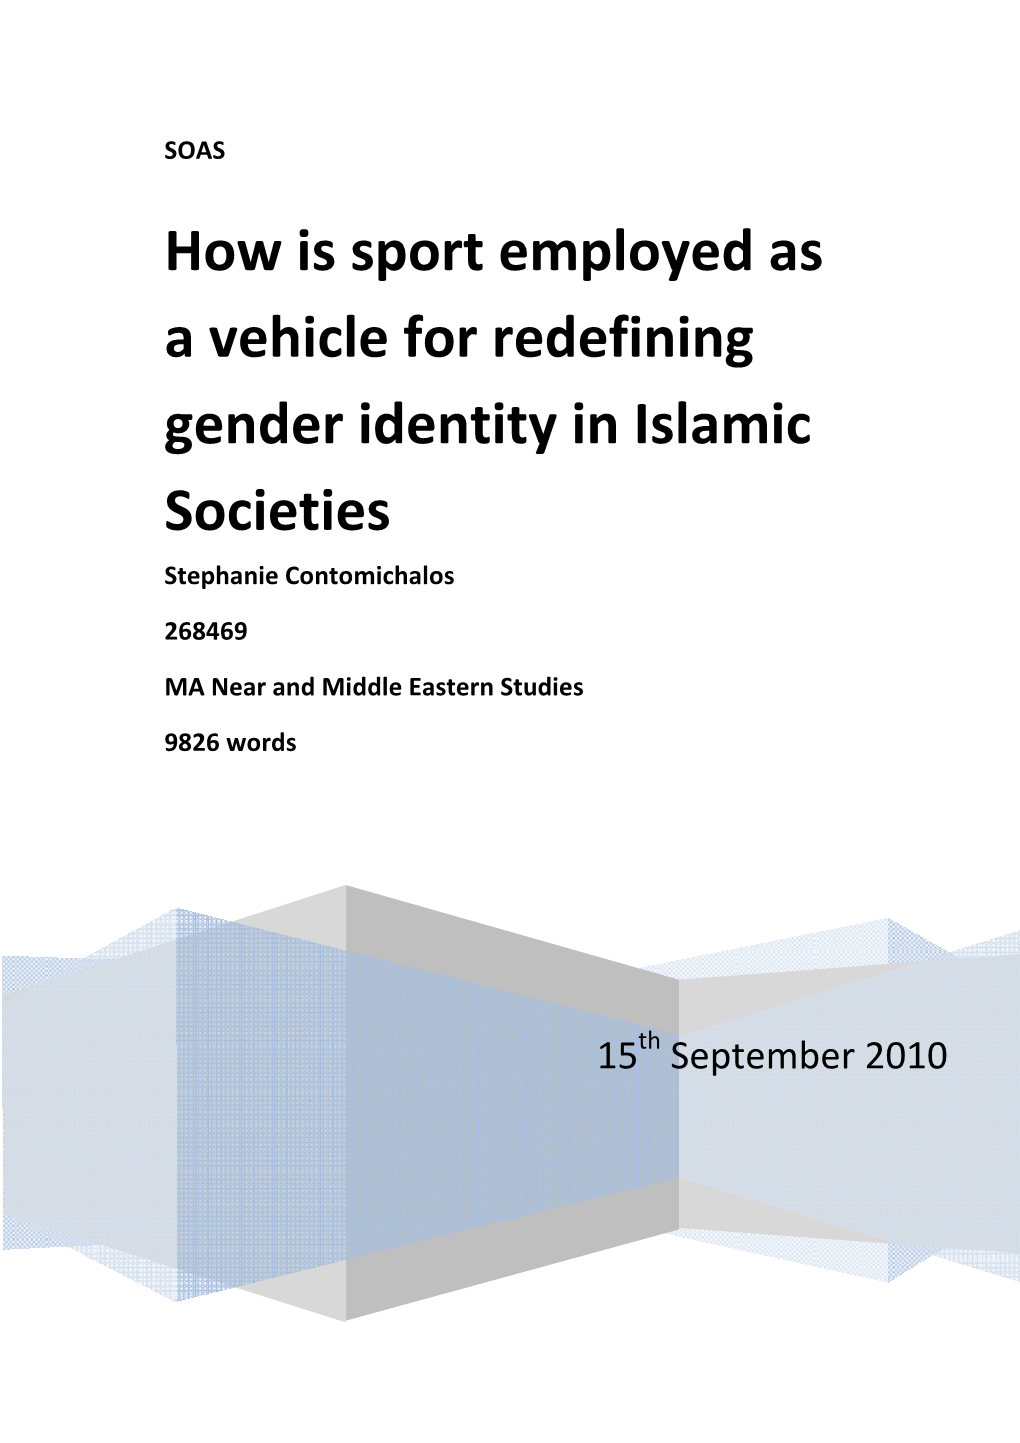 How Is Sport Employed As a Vehicle for Redefining Gender Identity in Islamic Societies Stephanie Contomichalos